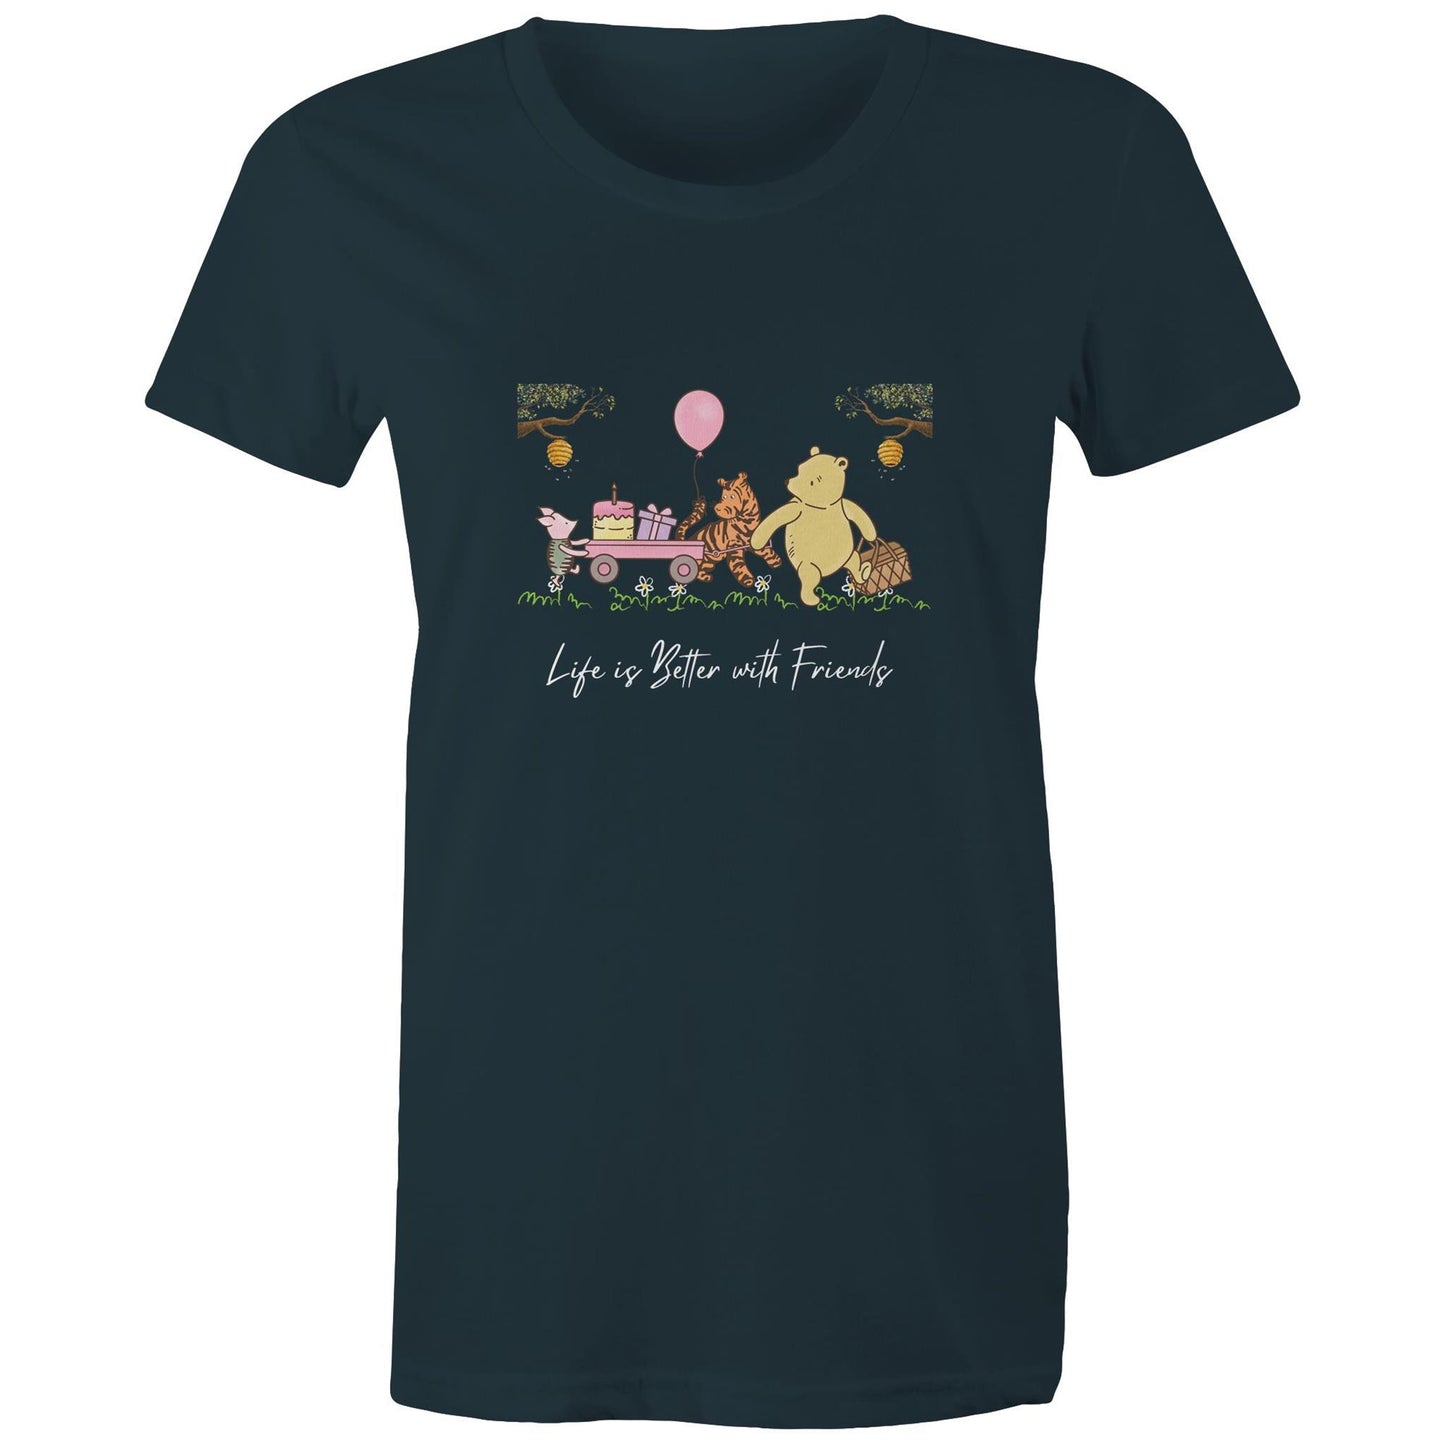 Classic Pooh and Friends Women's Maple Tee